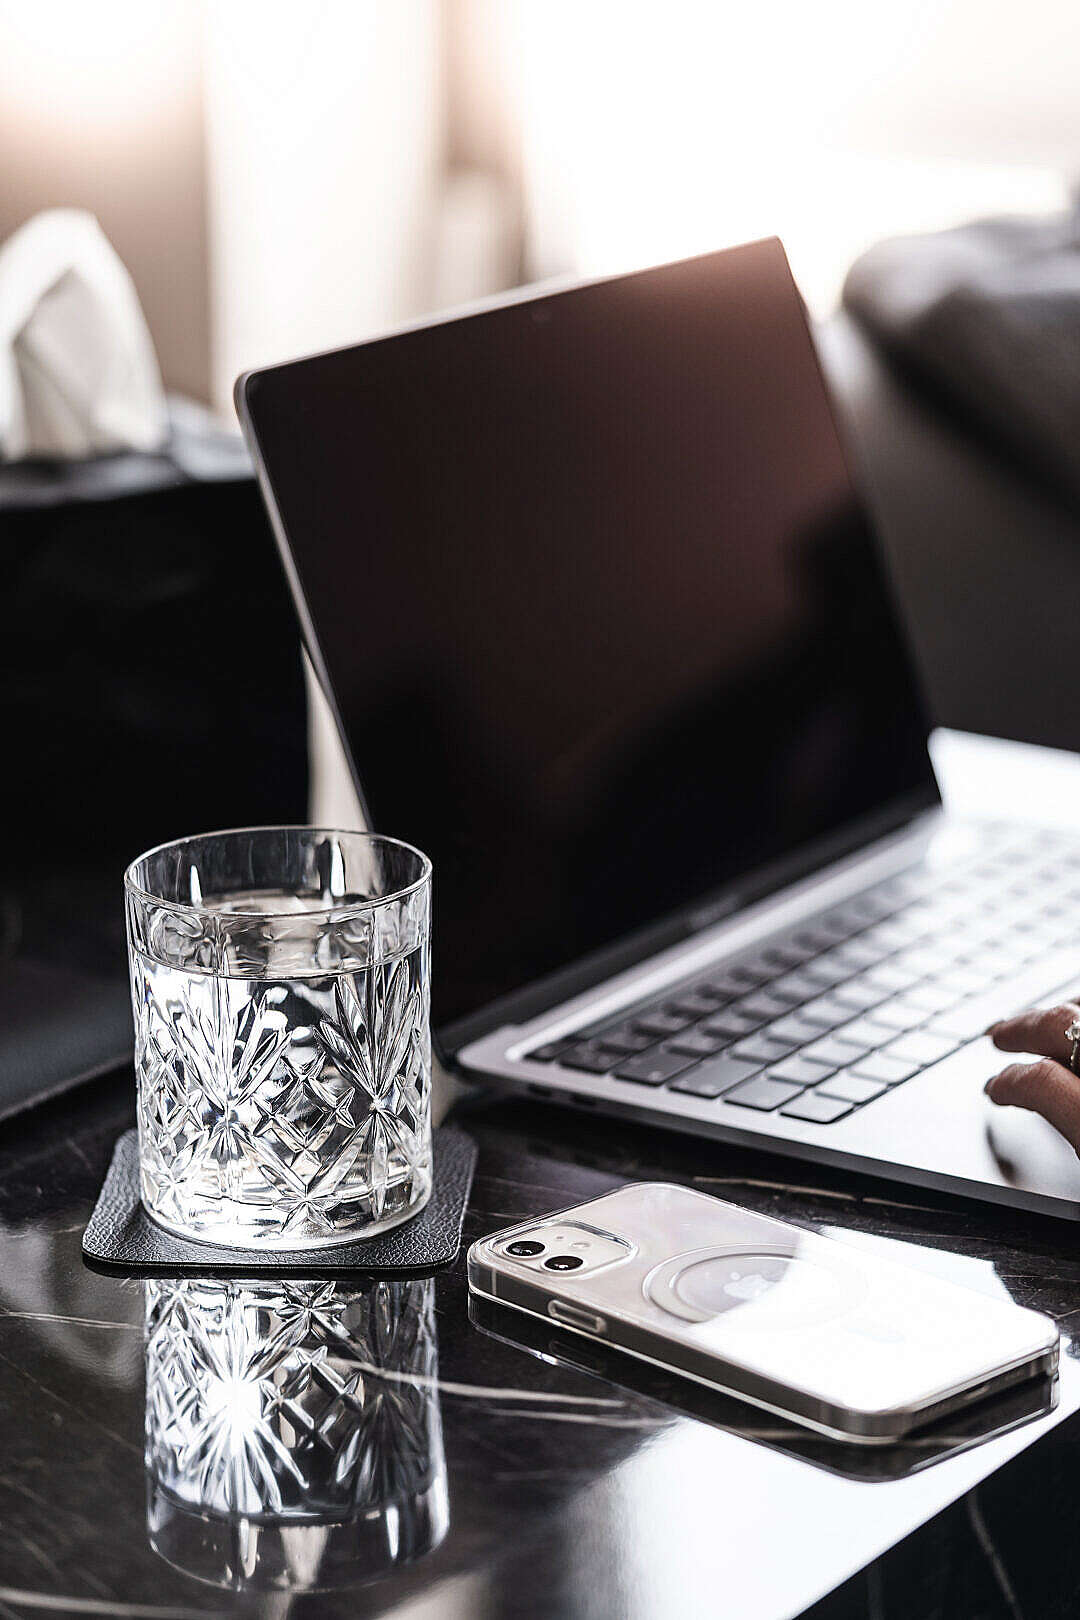 Laptop and Smartphone with a Crystal Glass of Water on a Luxury Marble Table